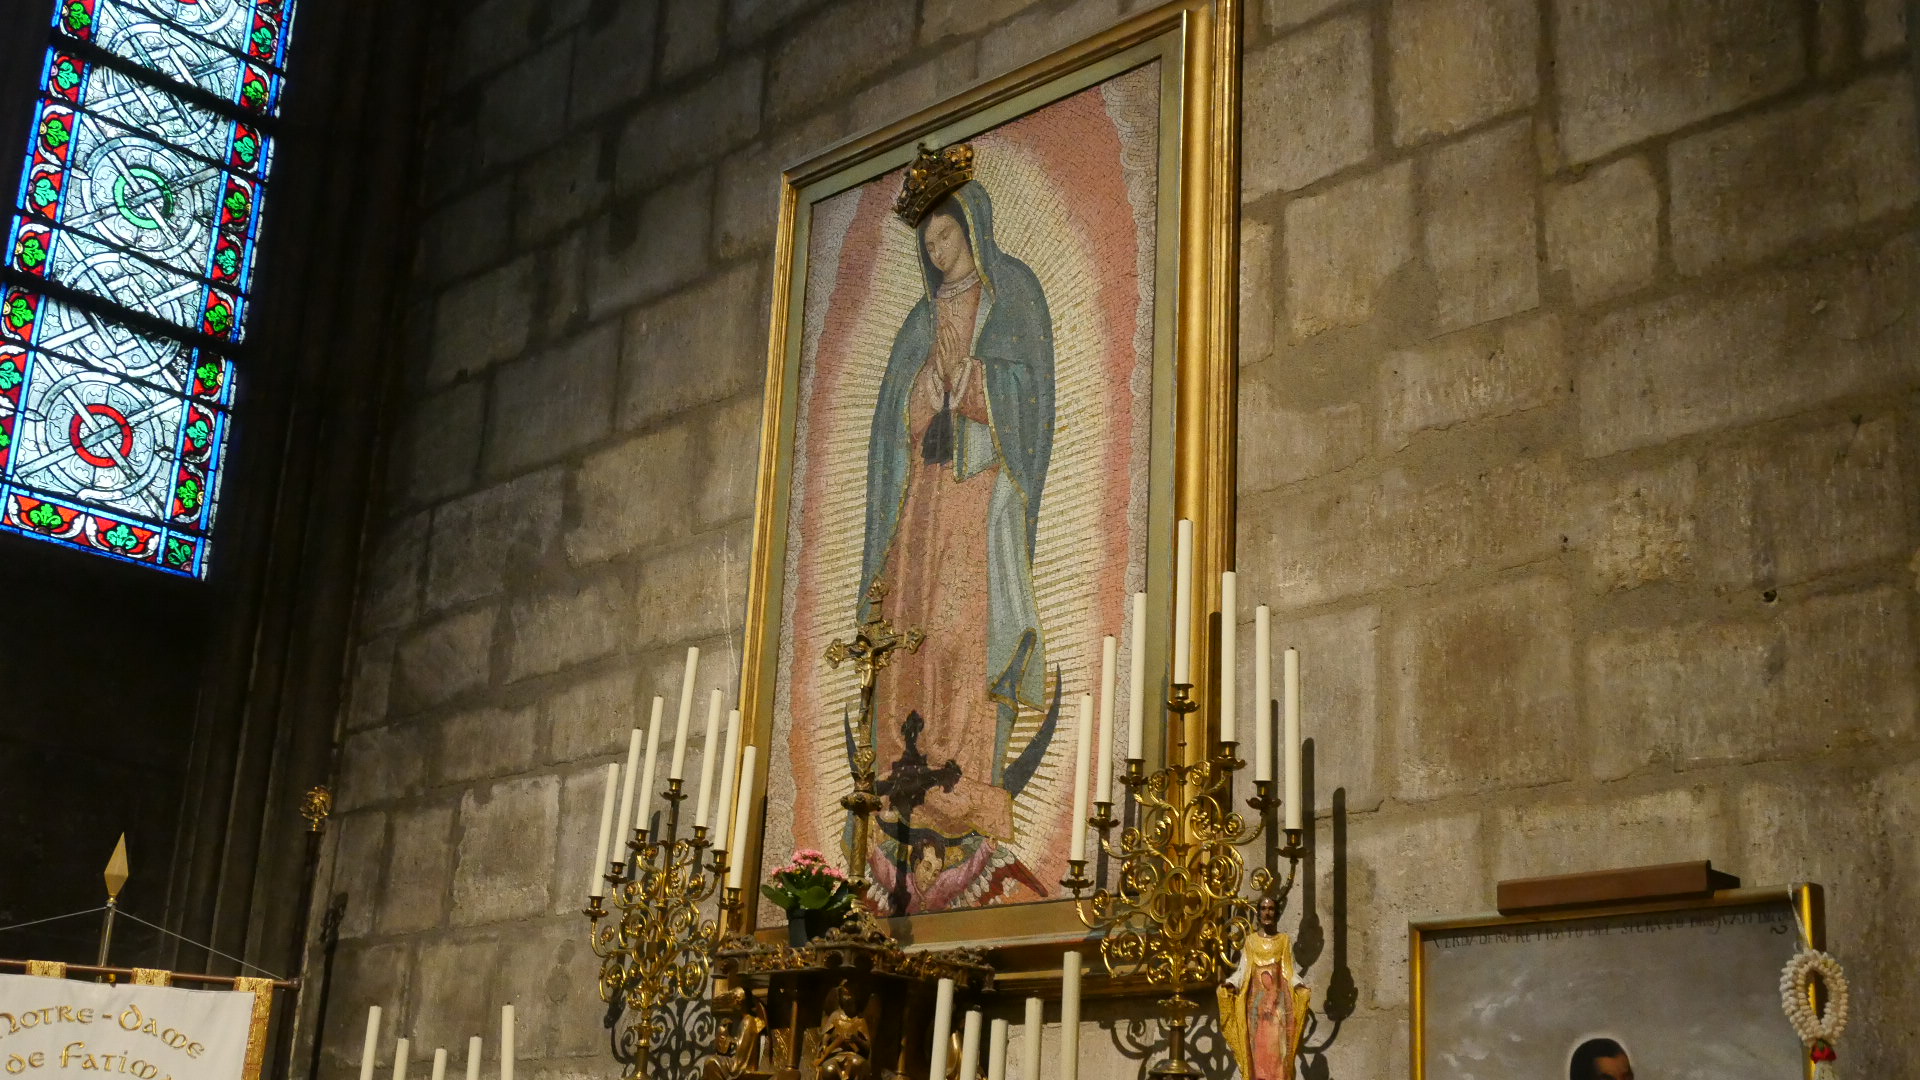 Photo of Our LPhoto of a copy of the famous image of the Virgin Mary that she created on Saint Juan Diego's "tilma." during her apparitions in Mexico City